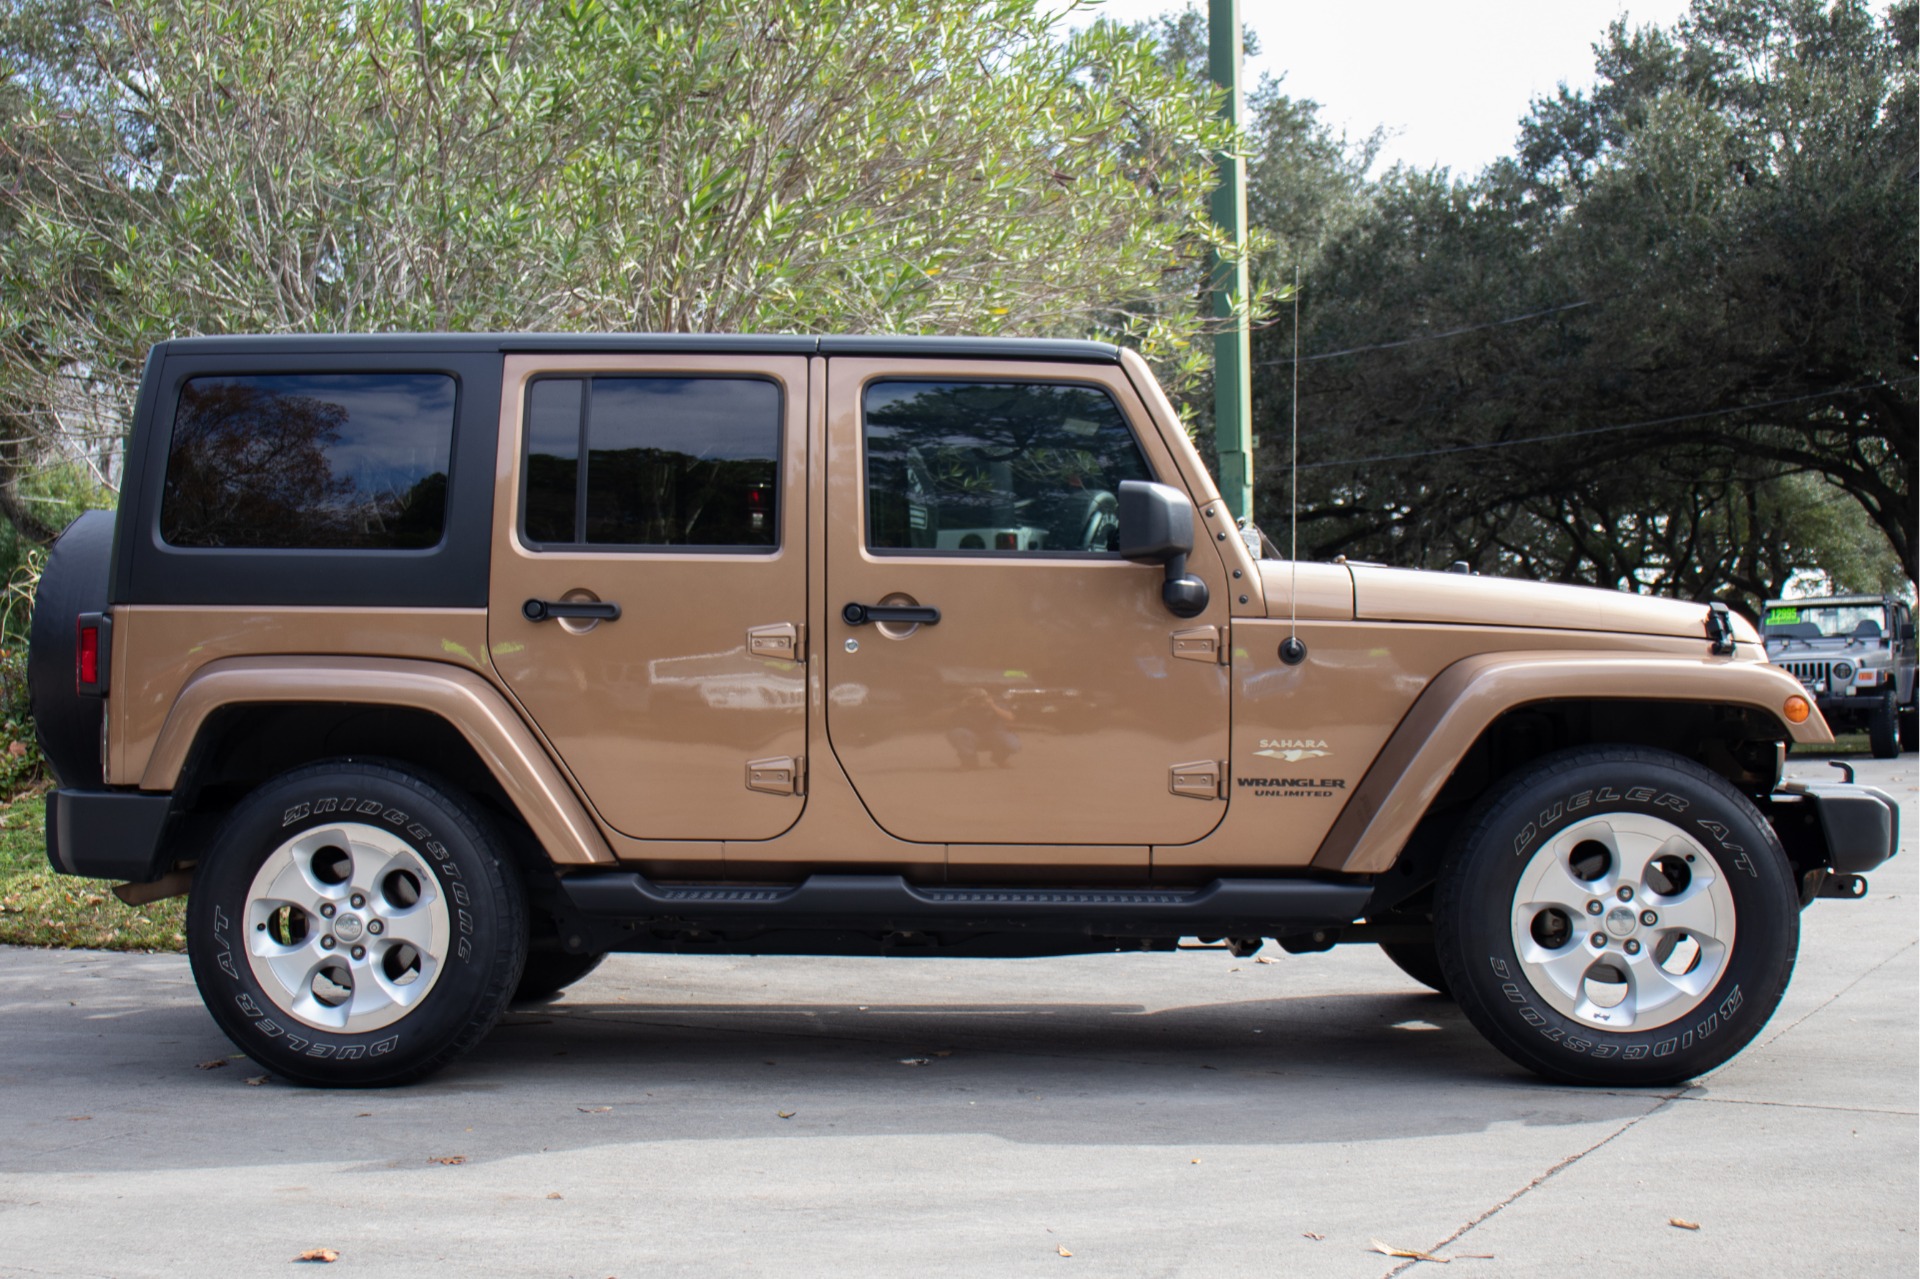 Used 2015 Jeep Wrangler Unlimited Sahara For Sale ($29,995) | Select Jeeps  Inc. Stock #645790